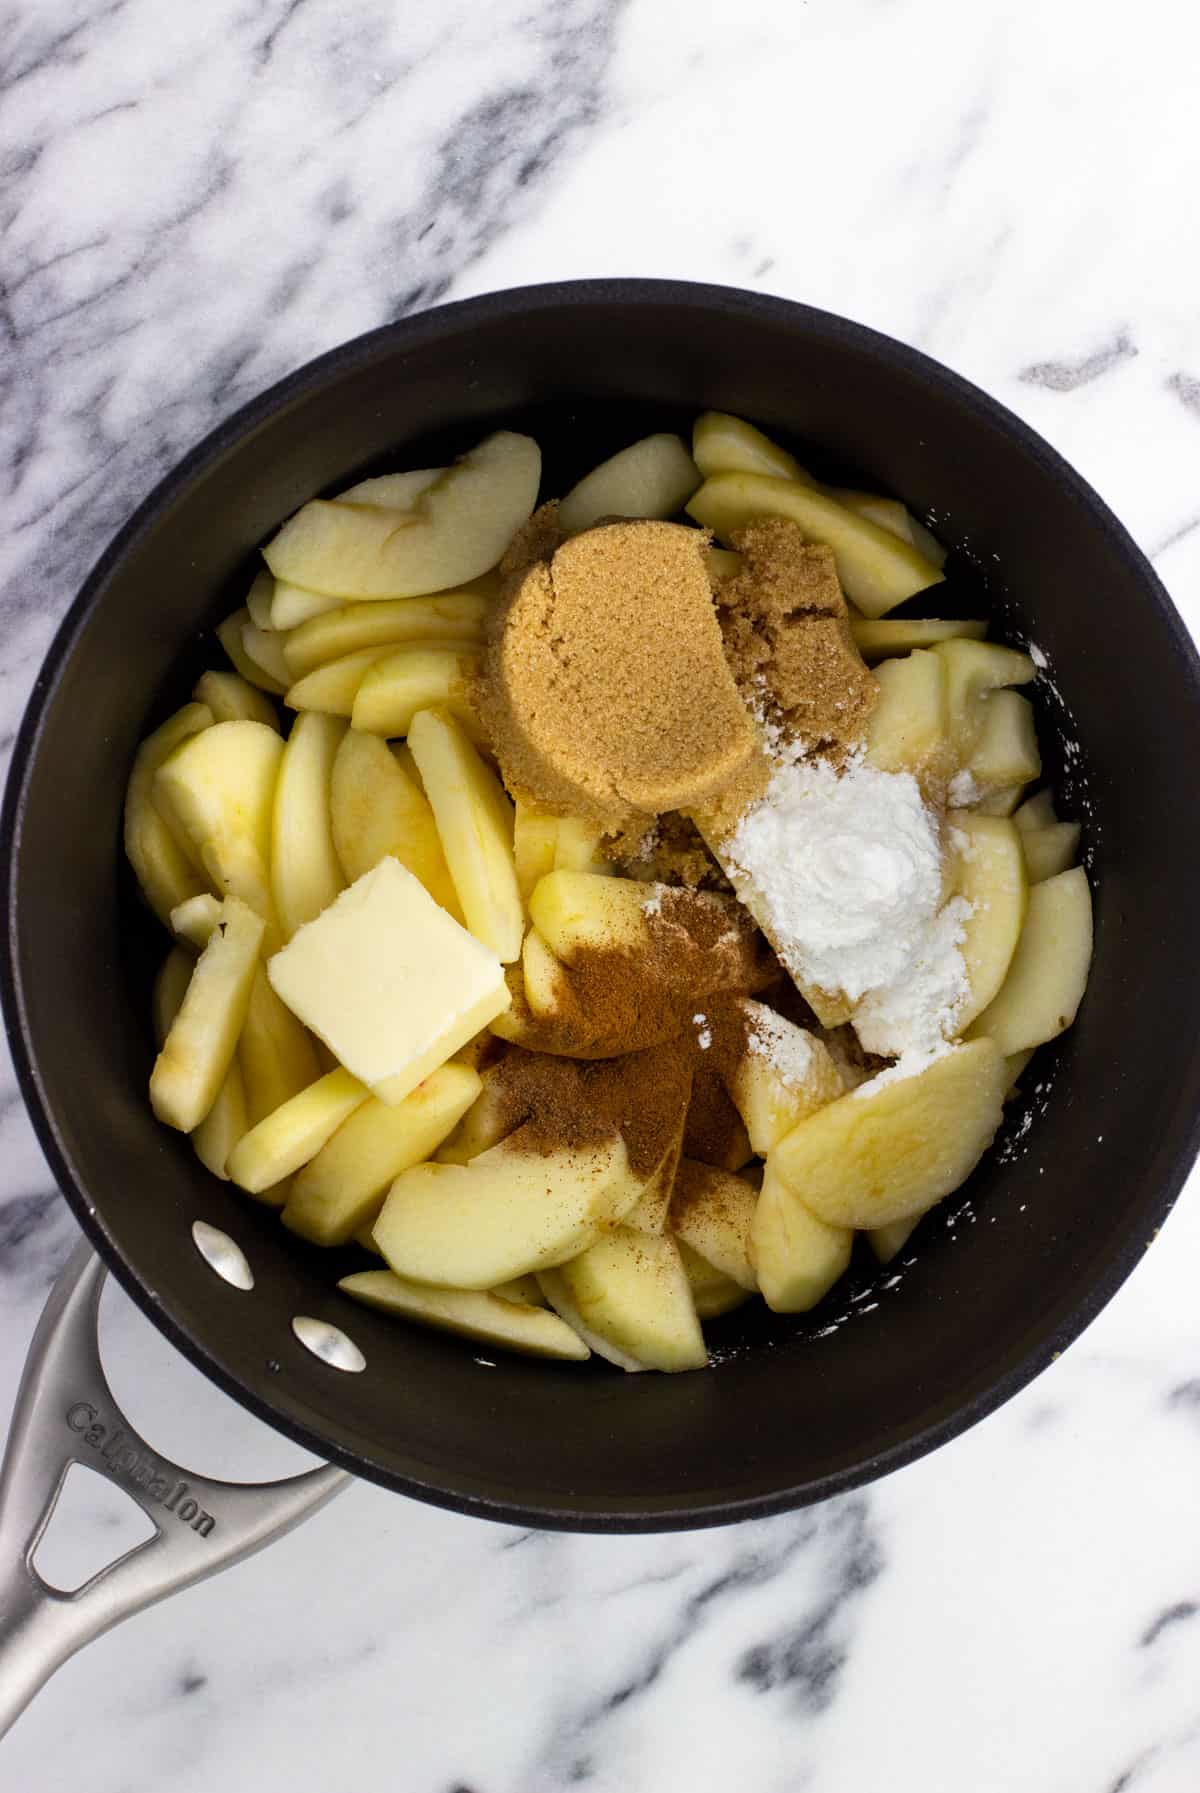 Sliced apples and the rest of the filling ingredients in a pan before cooking.